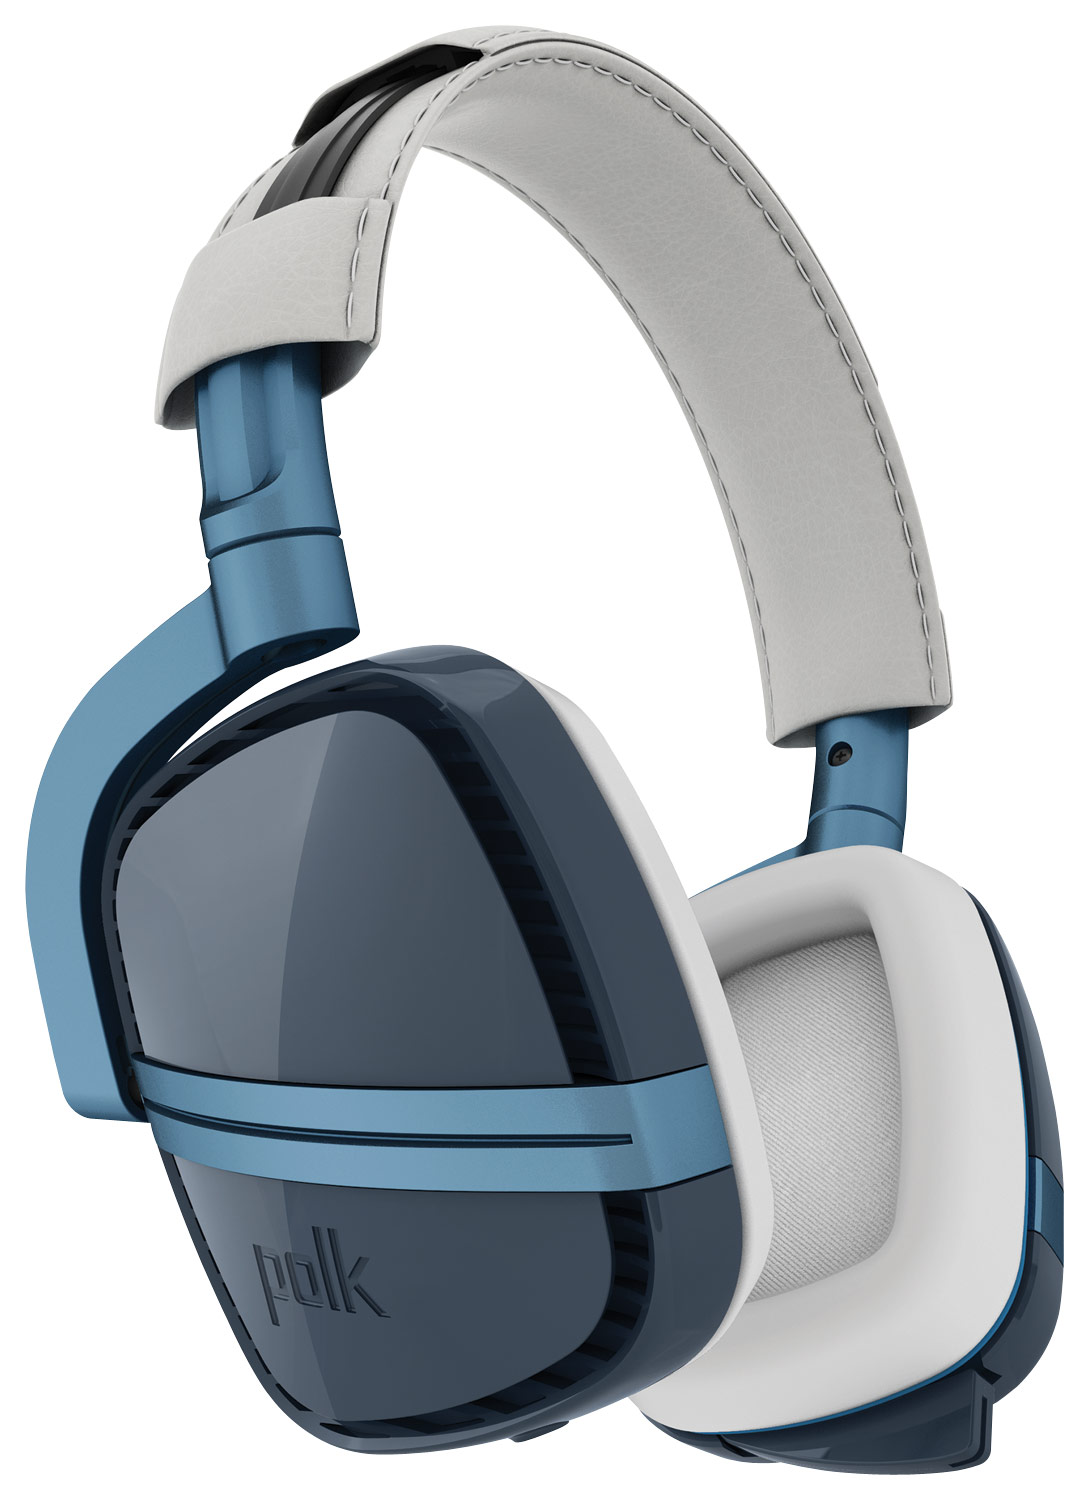 Sound BlasterX H6 - USB Gaming Headset with 7.1 Virtual Surround Sound,  Memory Foam Fabric Earpads, Hardware EQ Modes, and Ambient Monitoring -  Creative Labs (Pan Euro)